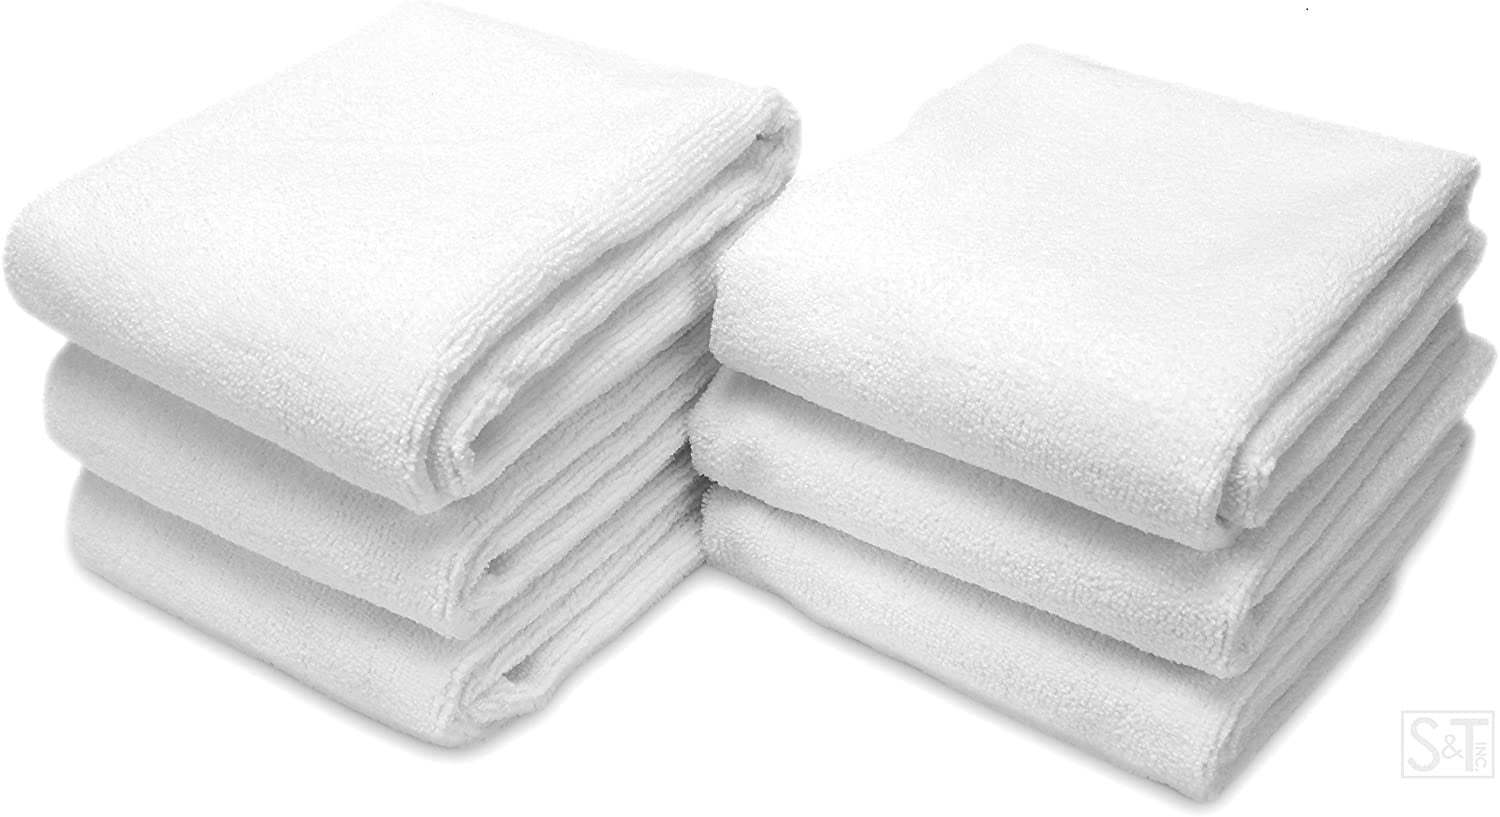 100% Cotton Chair Lounge Towels-16 Set Case Pack Gray